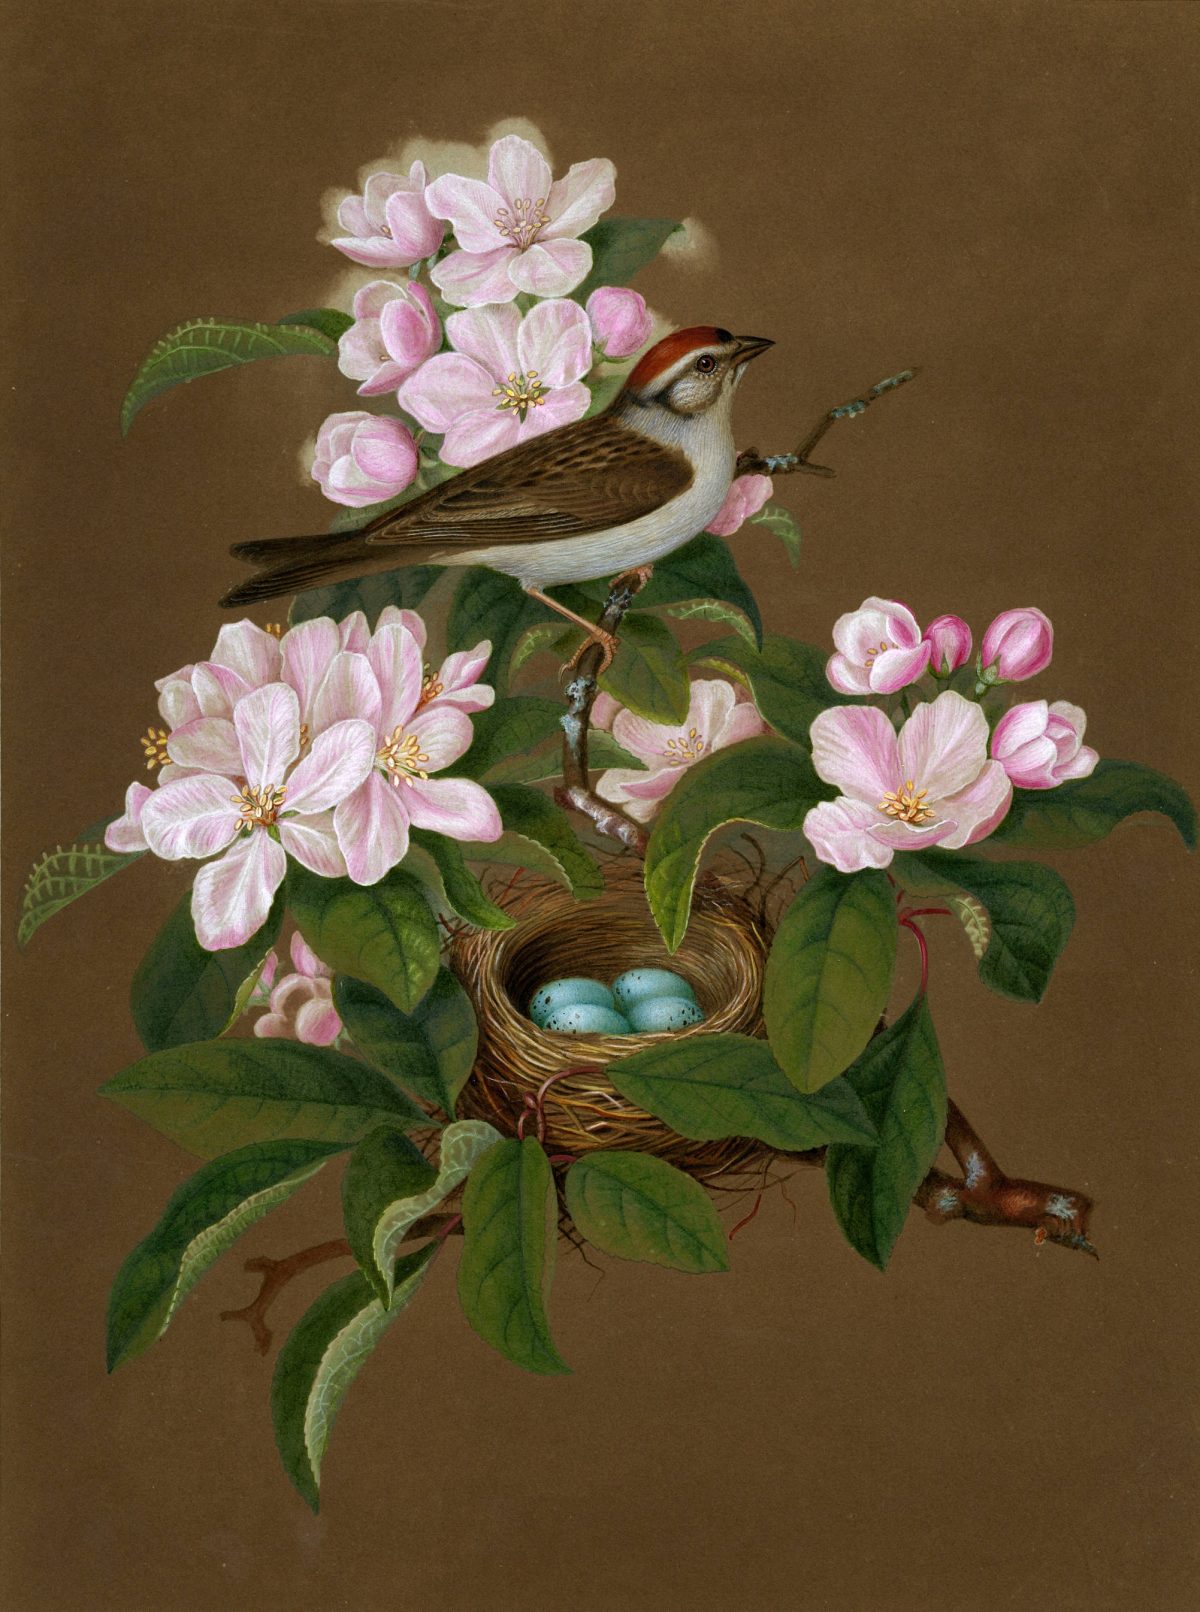 Chipping Sparrow "The sparrow is perched on a flowering branch which also holds a nest containing four blue-green eggs. The background is a deep brown."